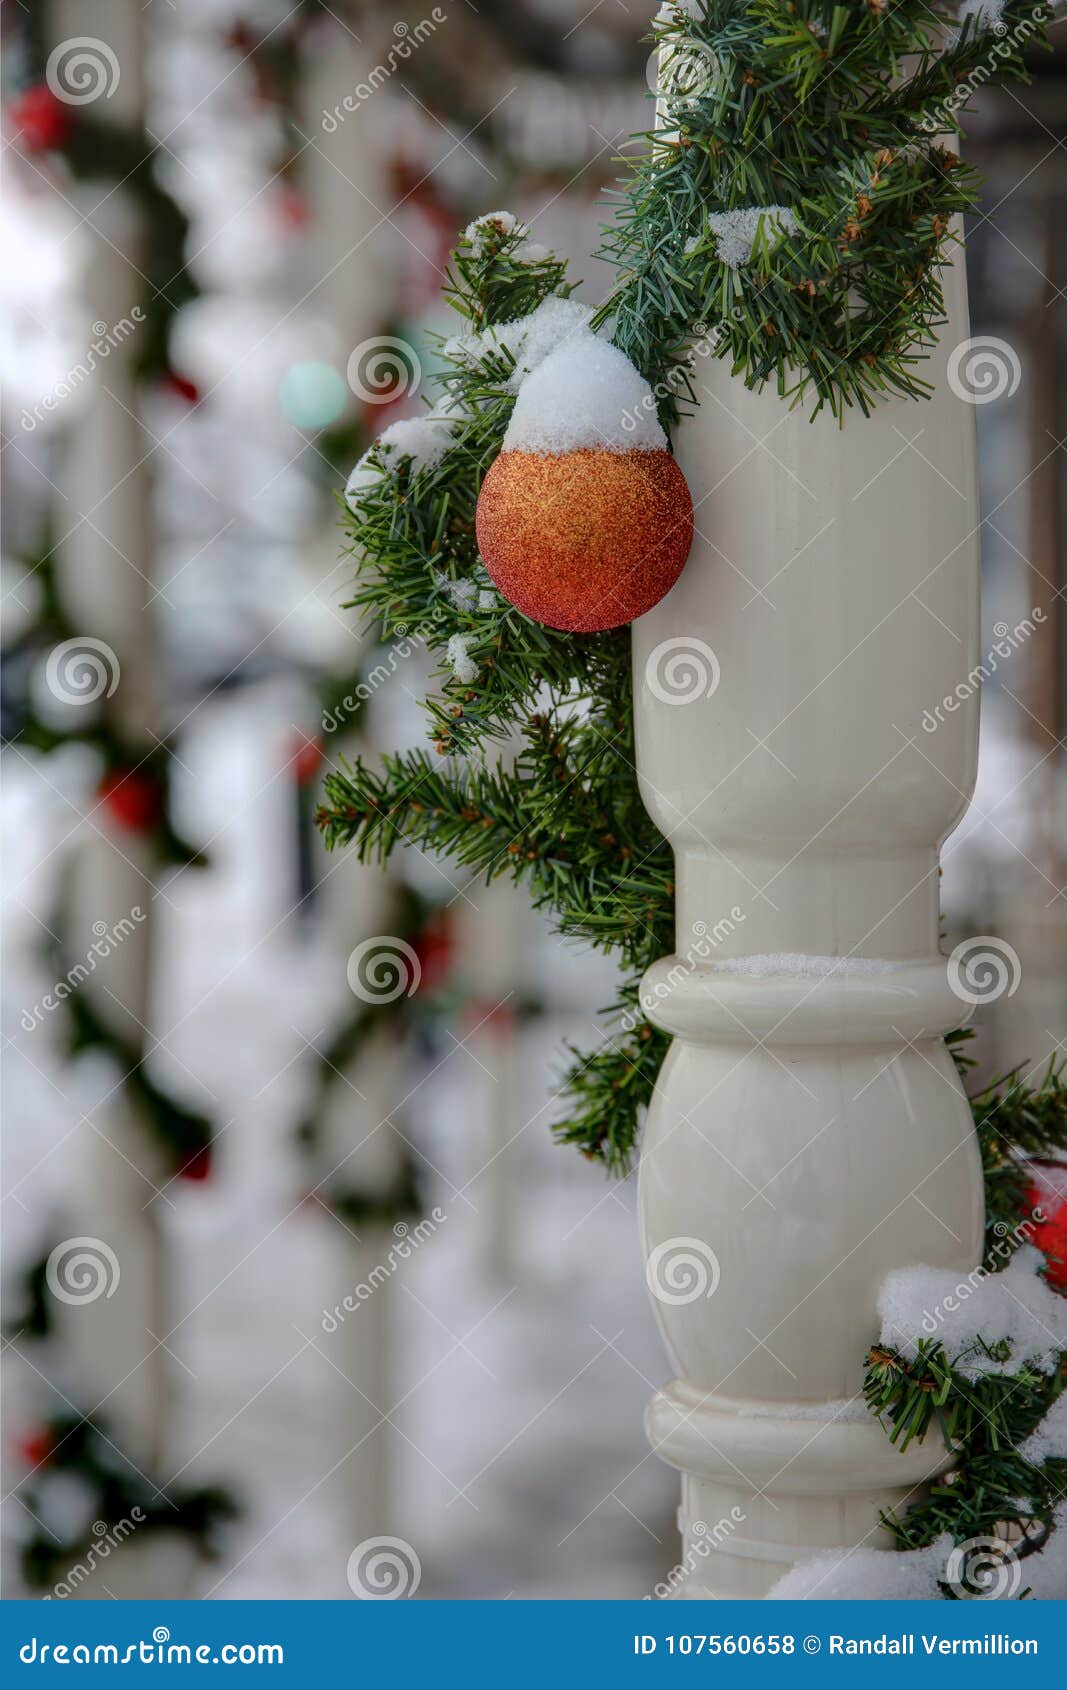 snow on ornaments